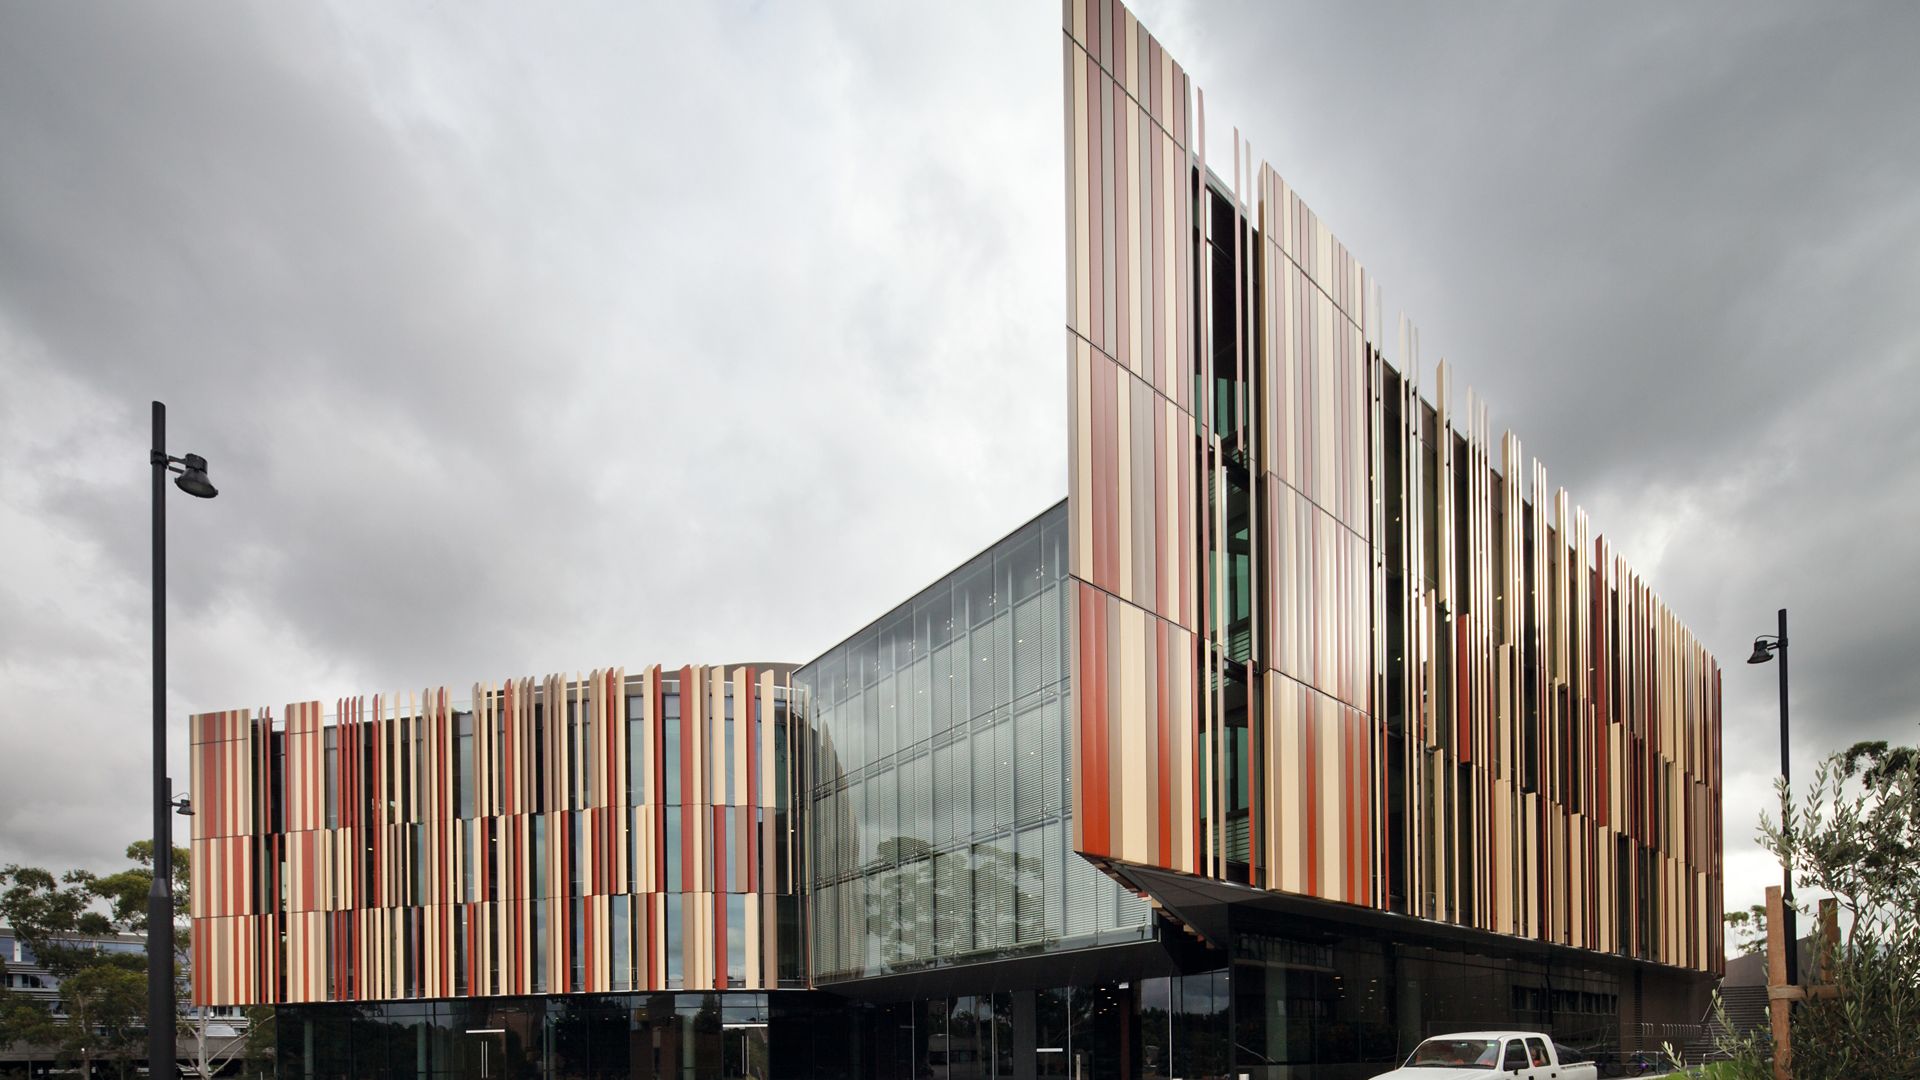 Architectural concrete facade of Macquarie University in Australia produced with Sika concrete admixtures